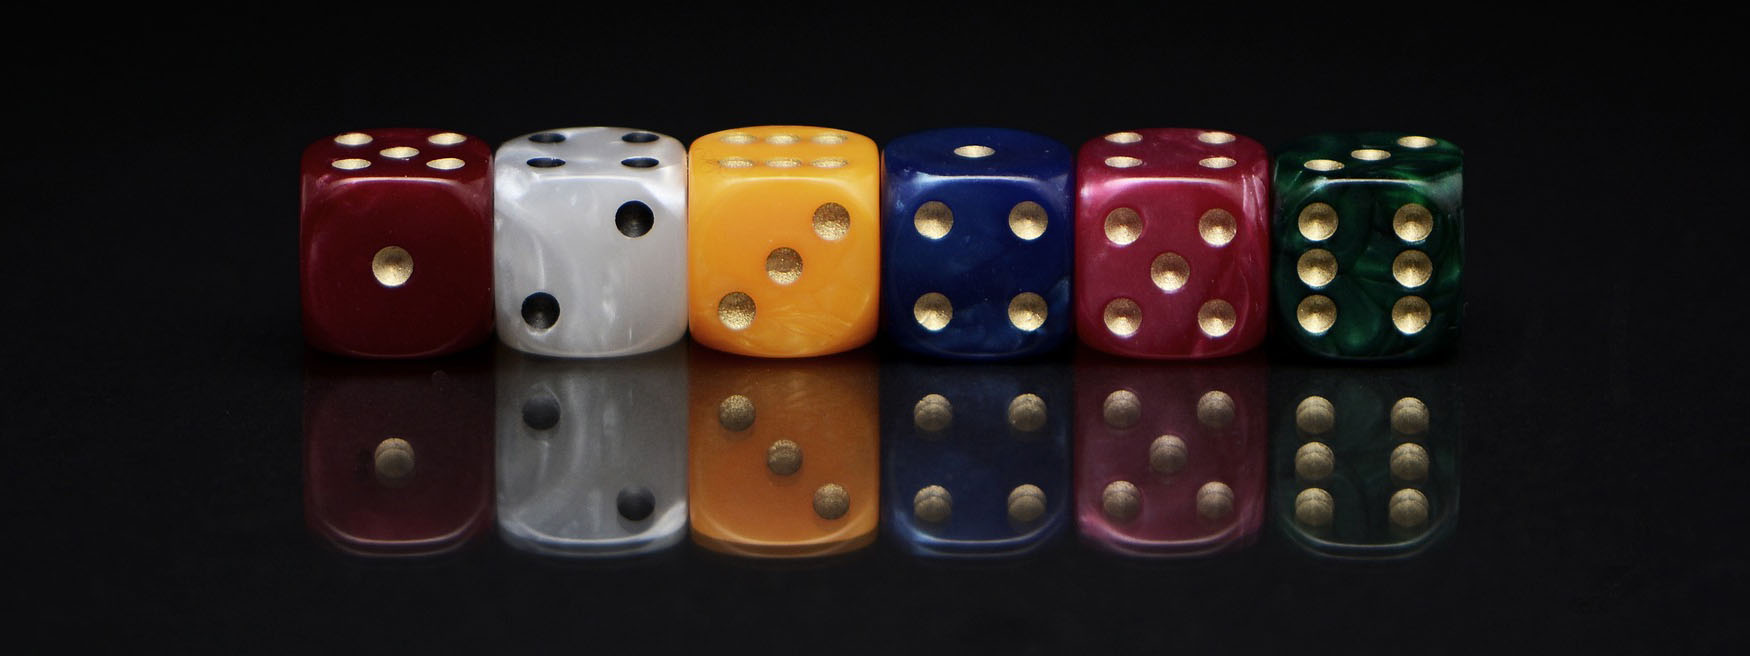 Six dices on a table